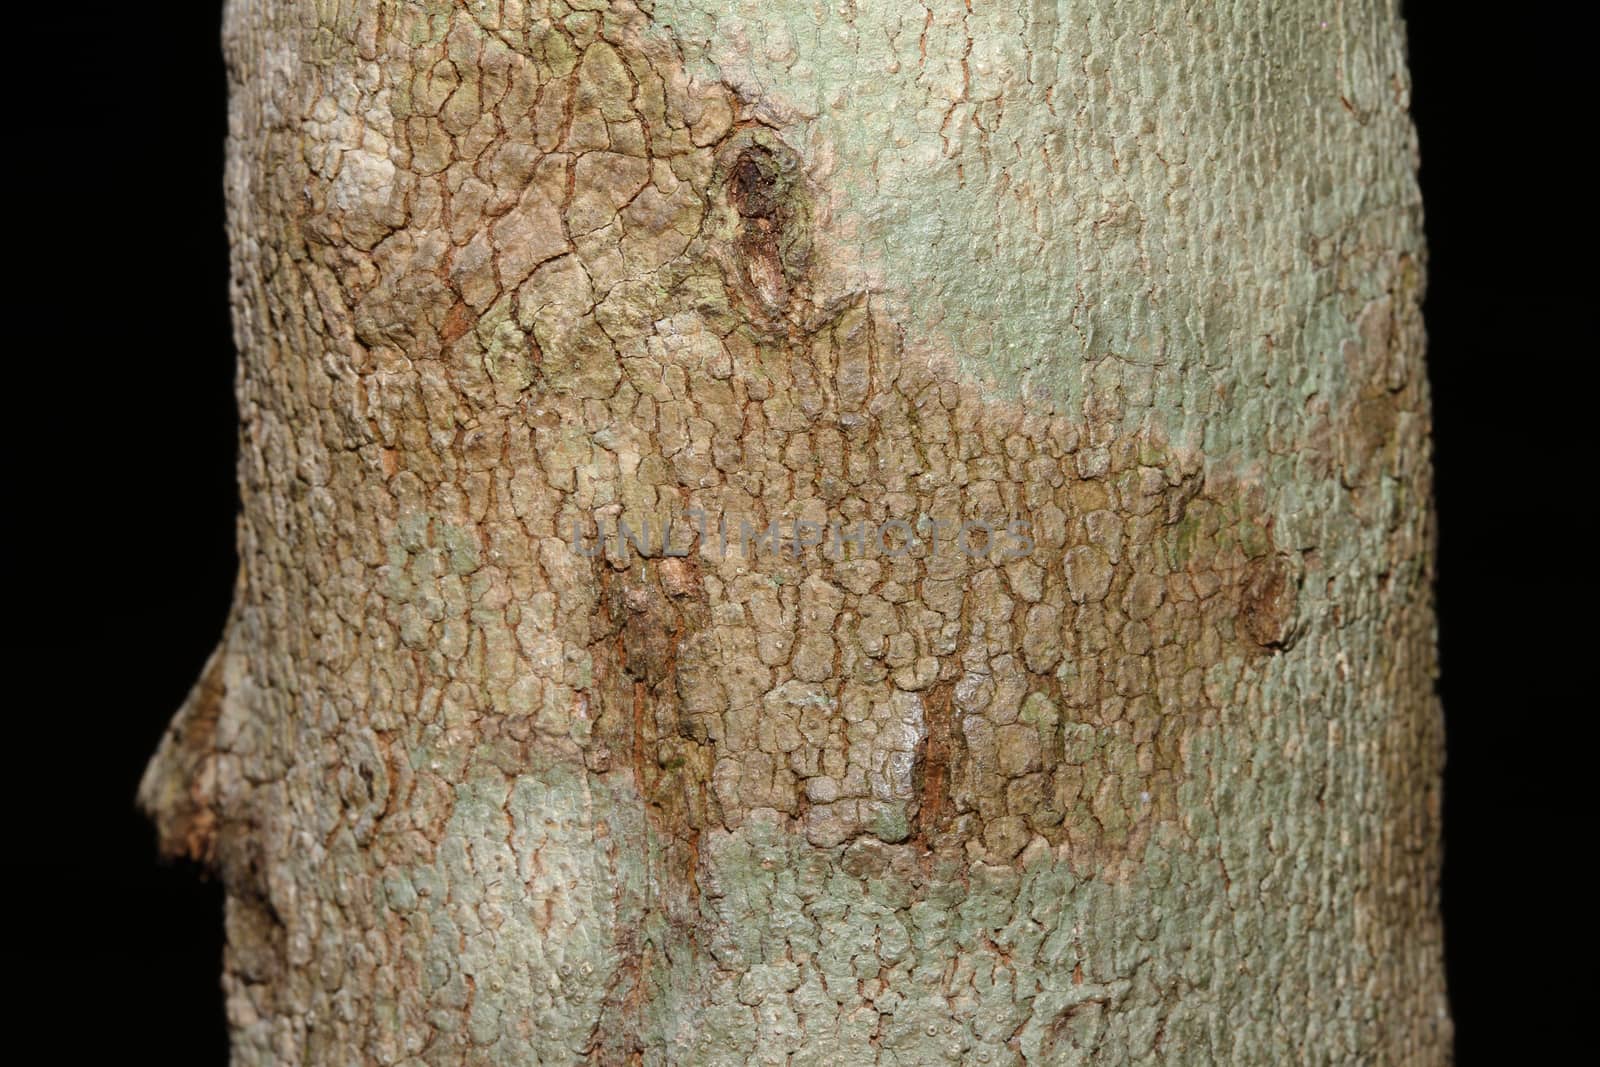 Tree bark texture in nature thailand by pumppump